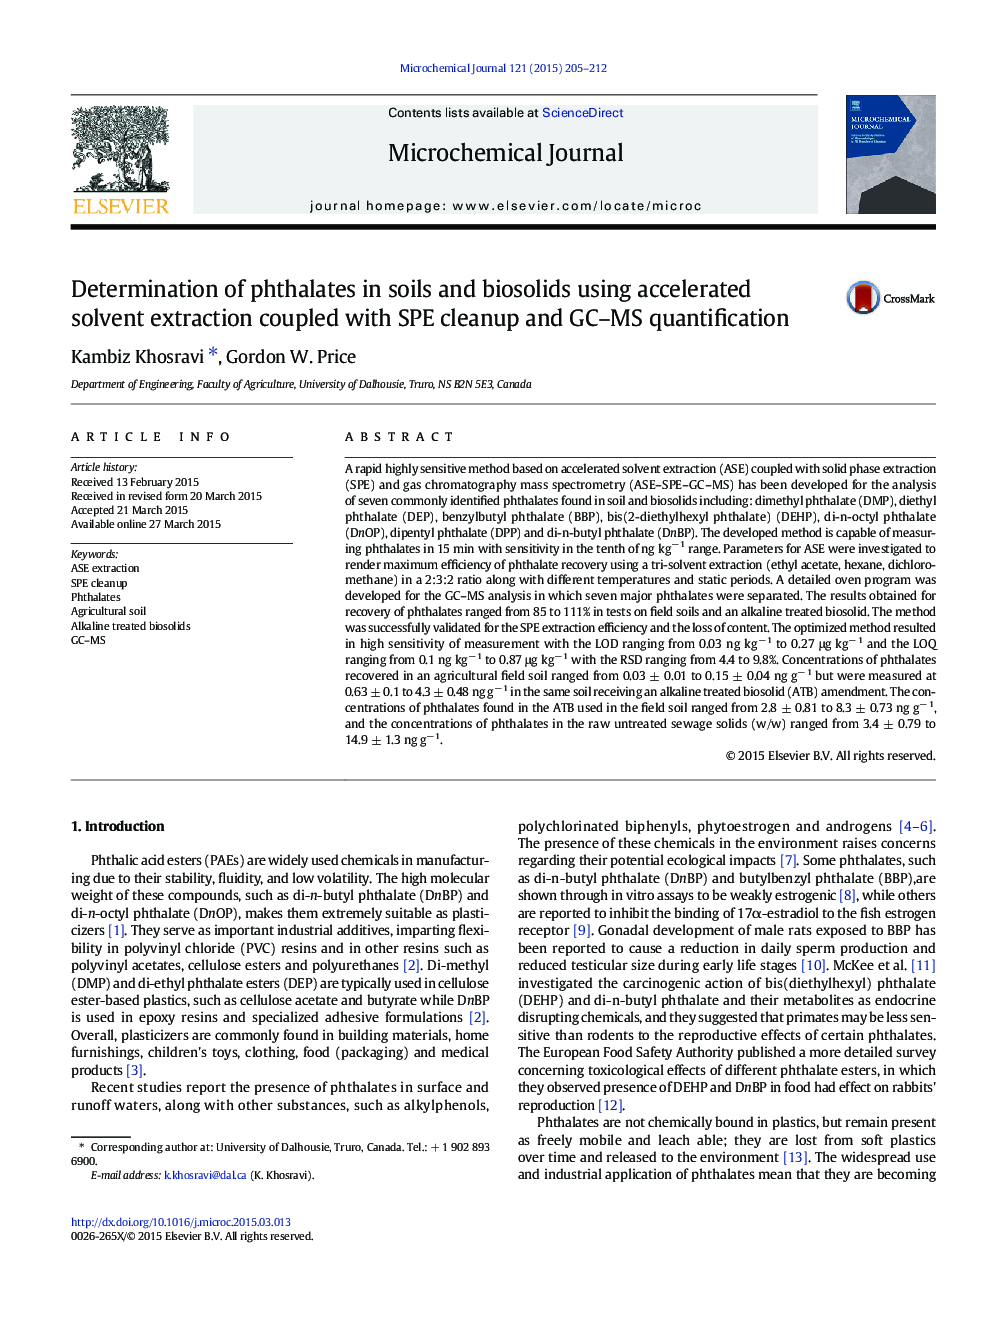 Determination of phthalates in soils and biosolids using accelerated solvent extraction coupled with SPE cleanup and GC–MS quantification